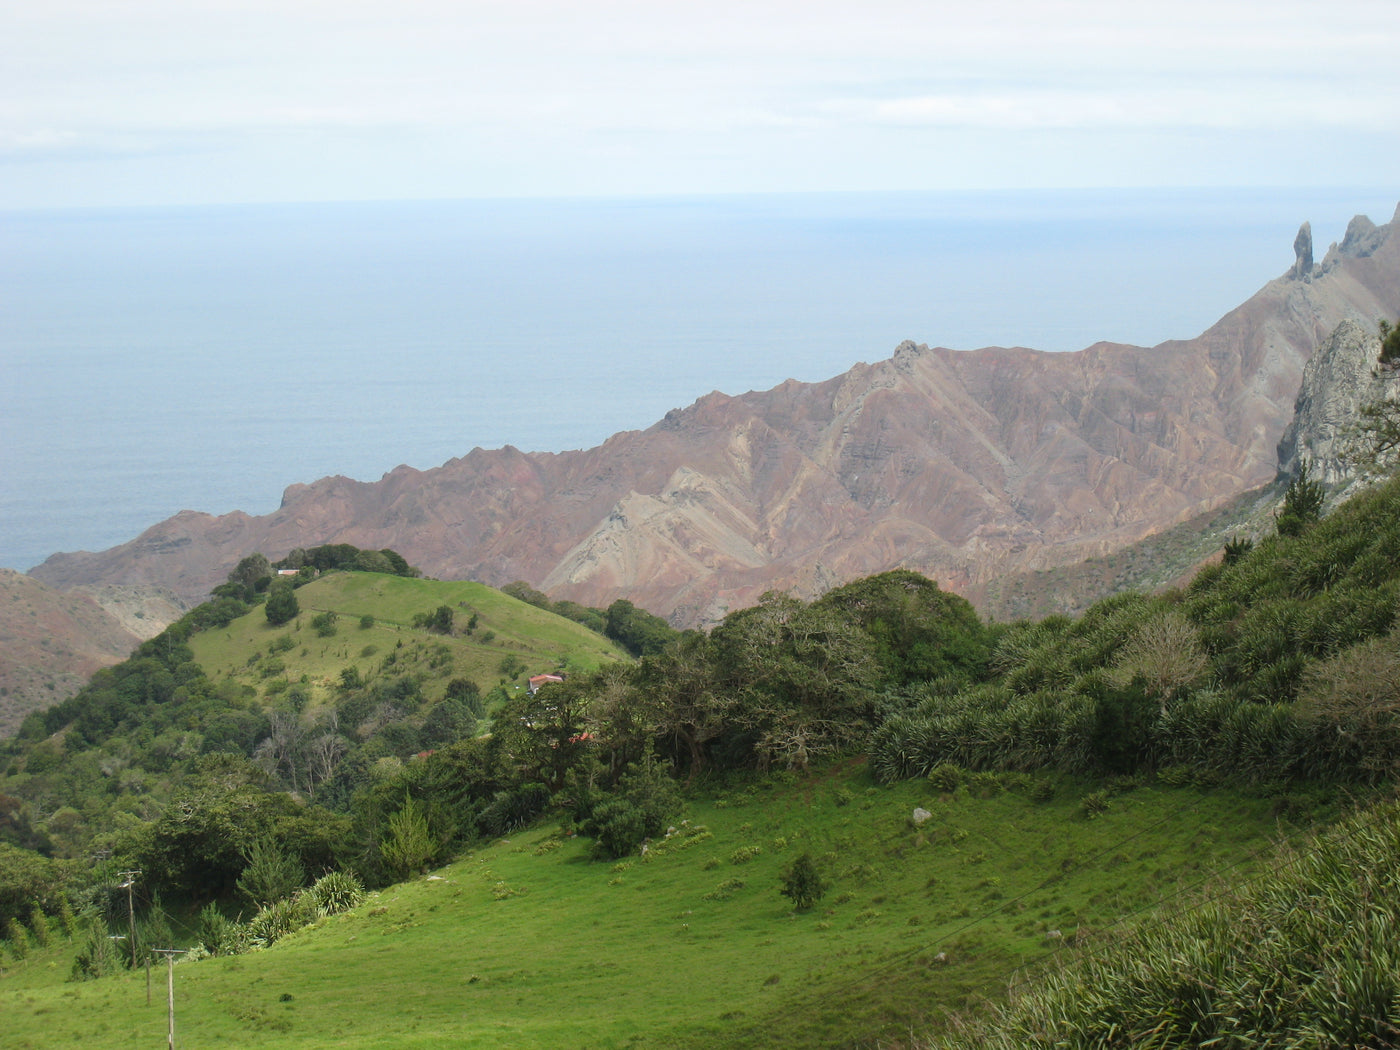 Landscape view of St Helena island